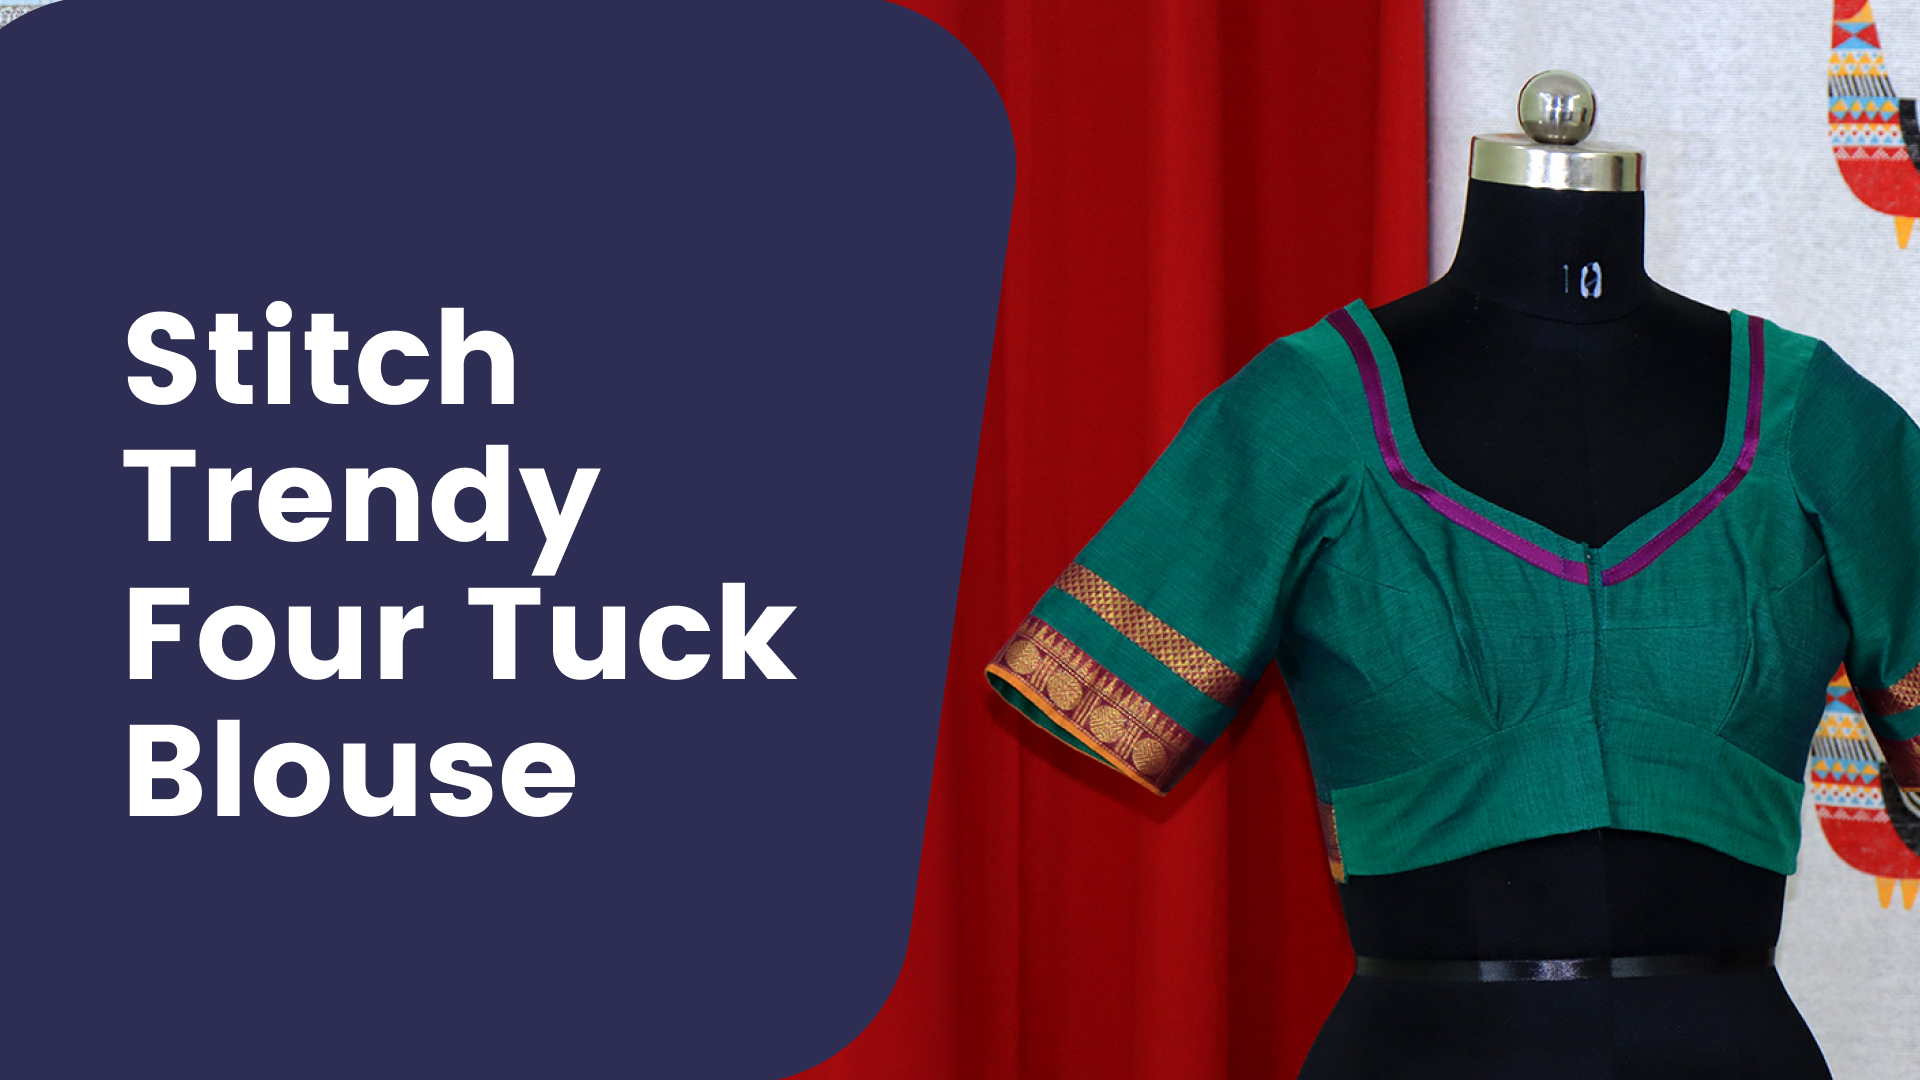 Course Trailer: Patchwork Blouse with Four Tuck Blouse. Watch to know more.